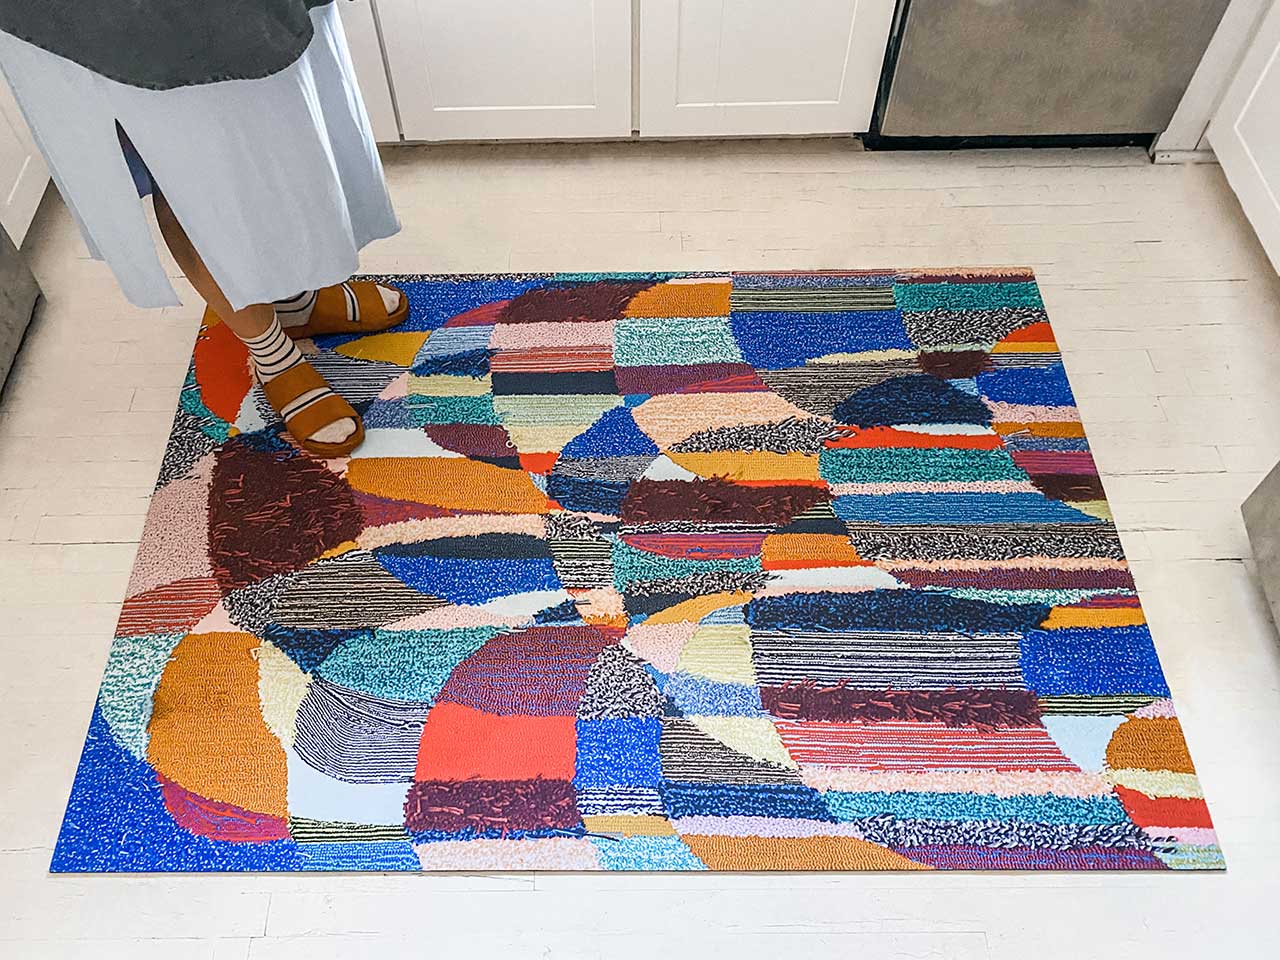 Trish Andersen Digitally Printed Floor Mats Are Wildly Colorful and Washable